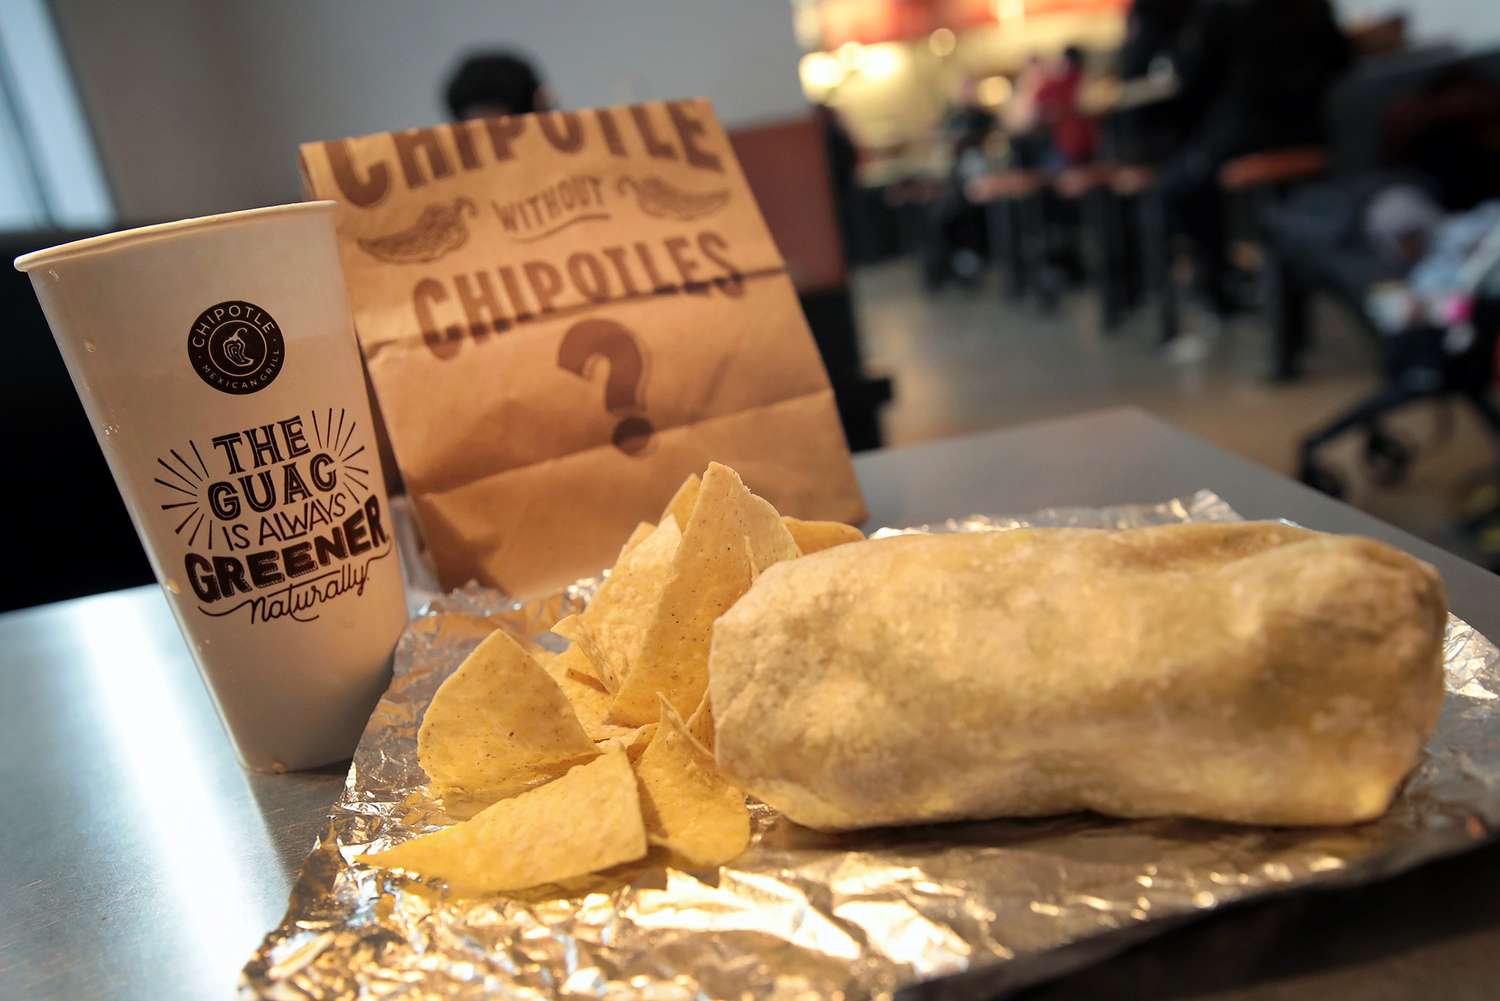 Chipotle Burrito Chips and Drink